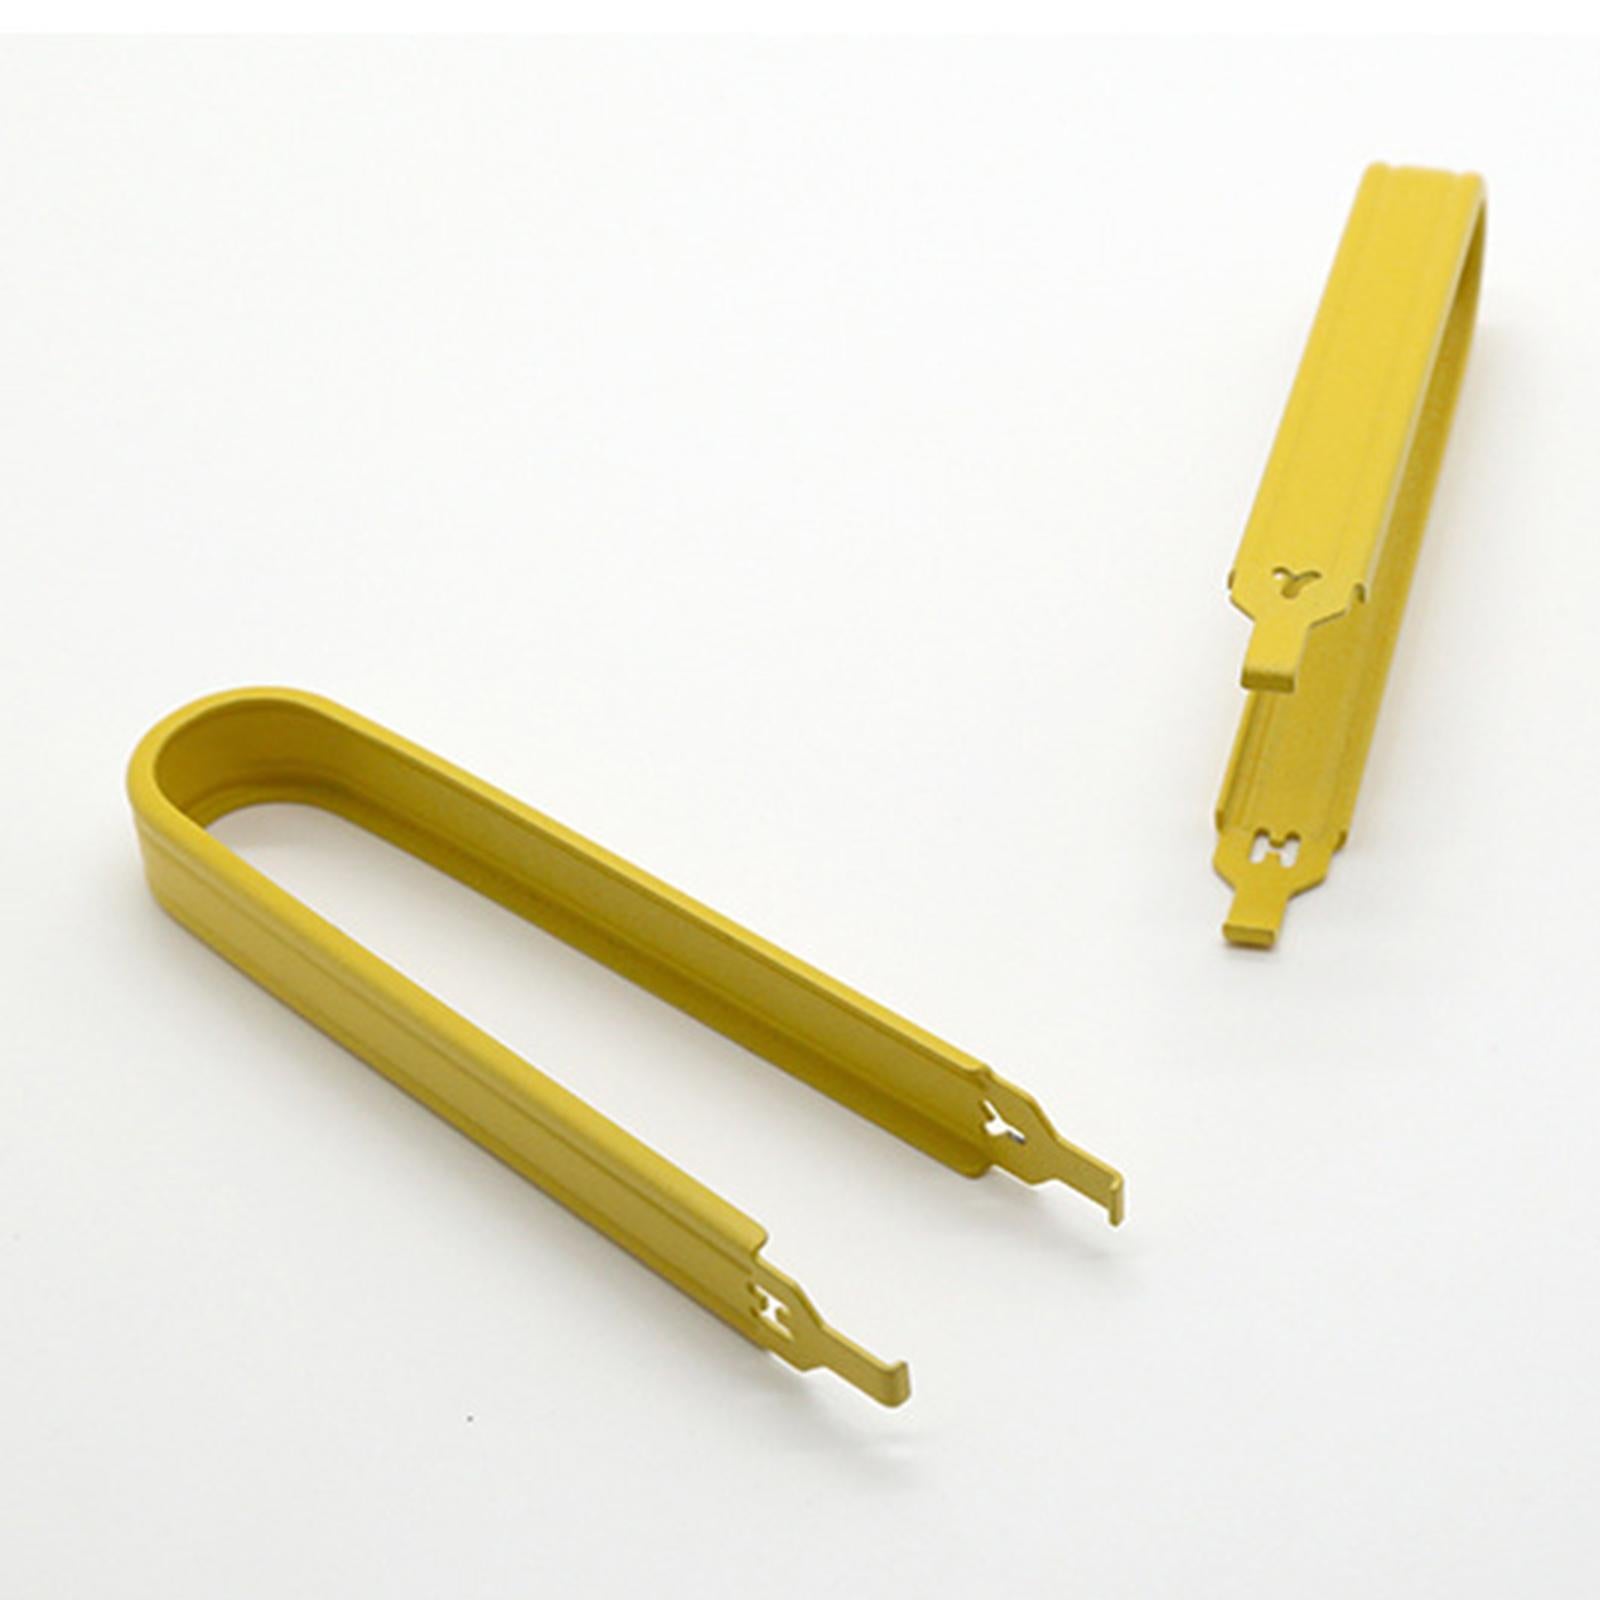 Yellow Keyboard Switch Puller Antistatic Clip Pliers Professional Tool